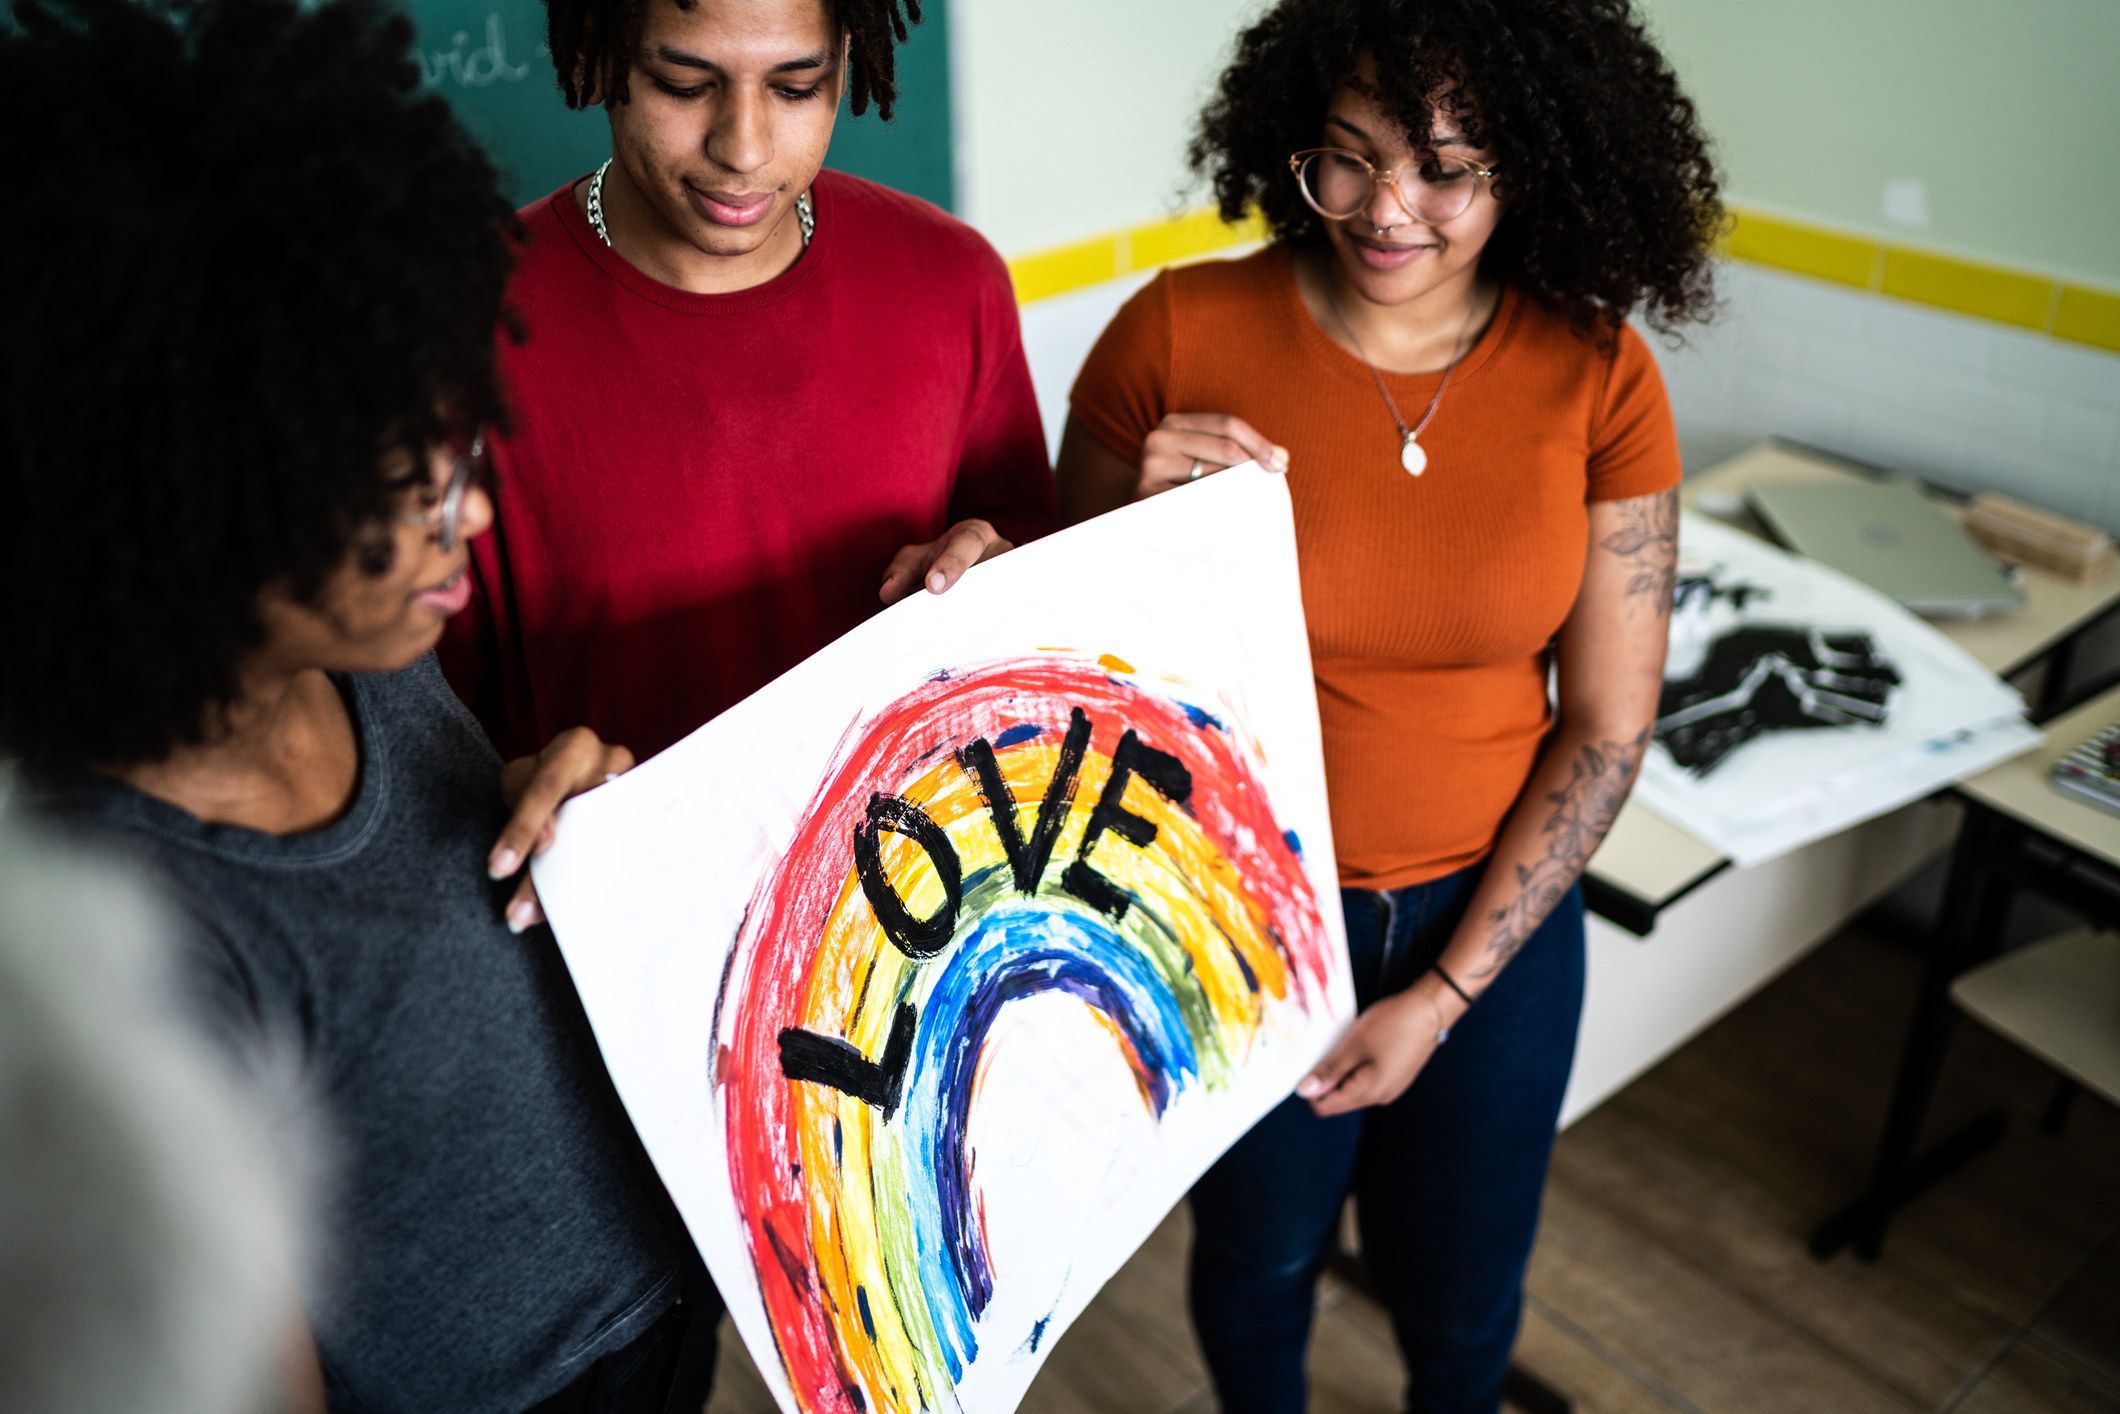 students holding a rainbow poster with love written on it